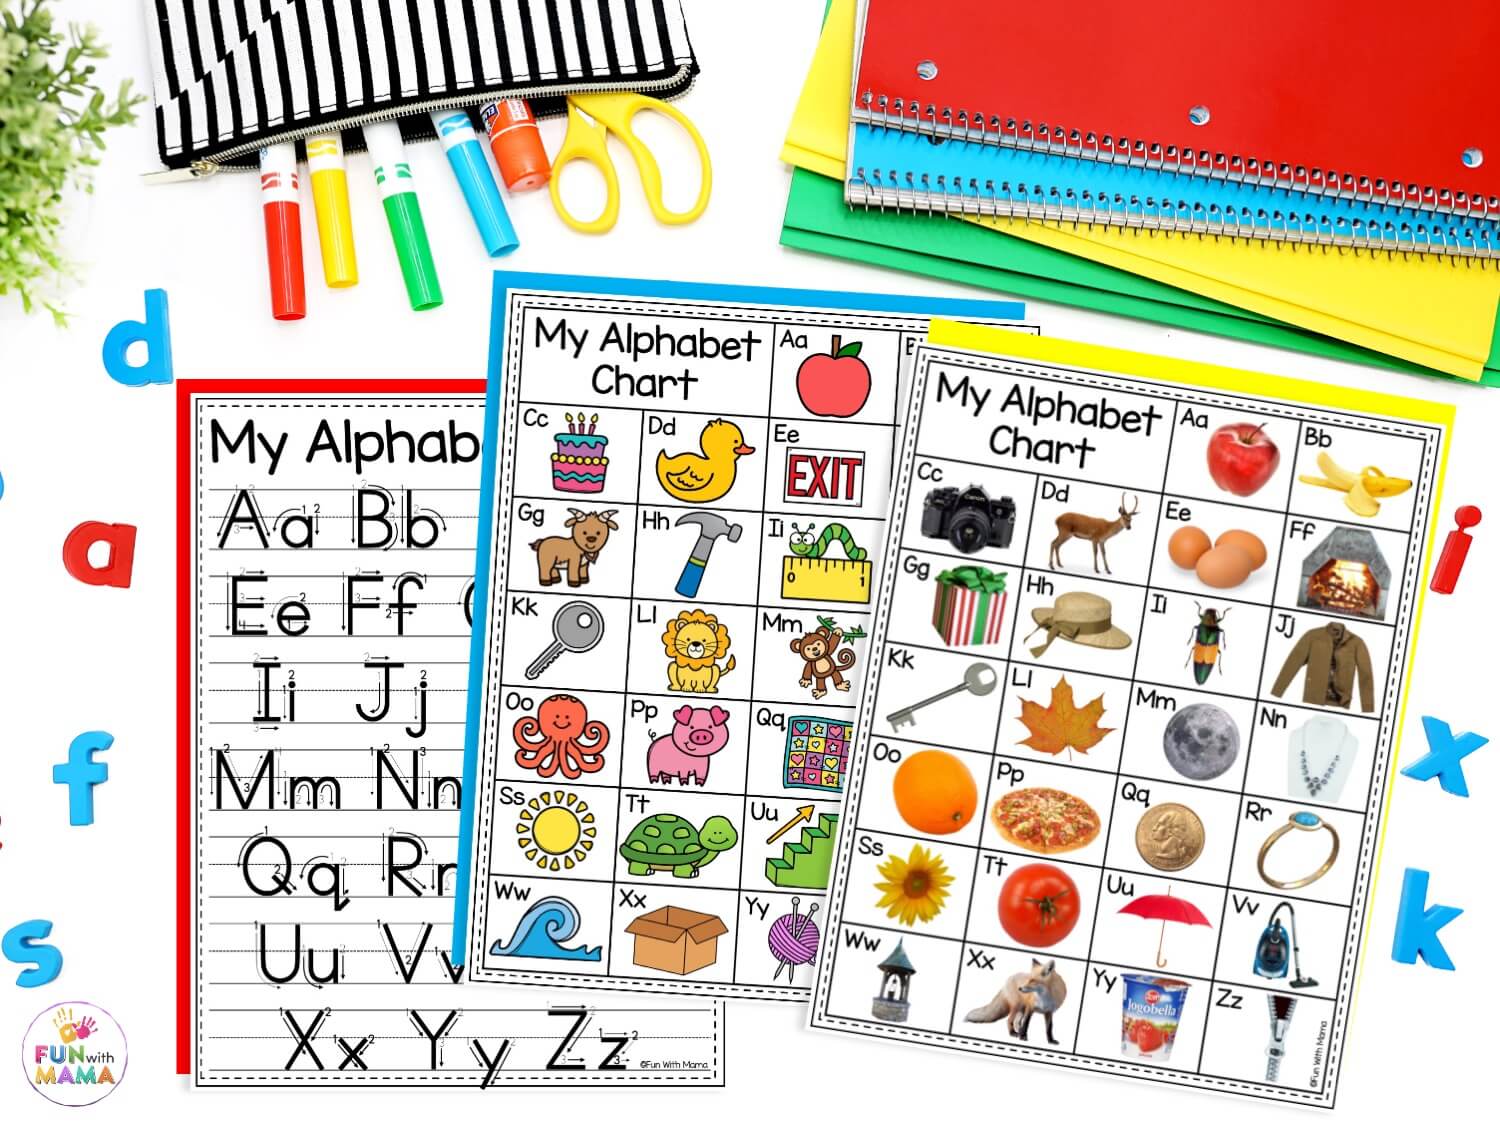 Layout of two colorful alphabet charts and a free tracing page